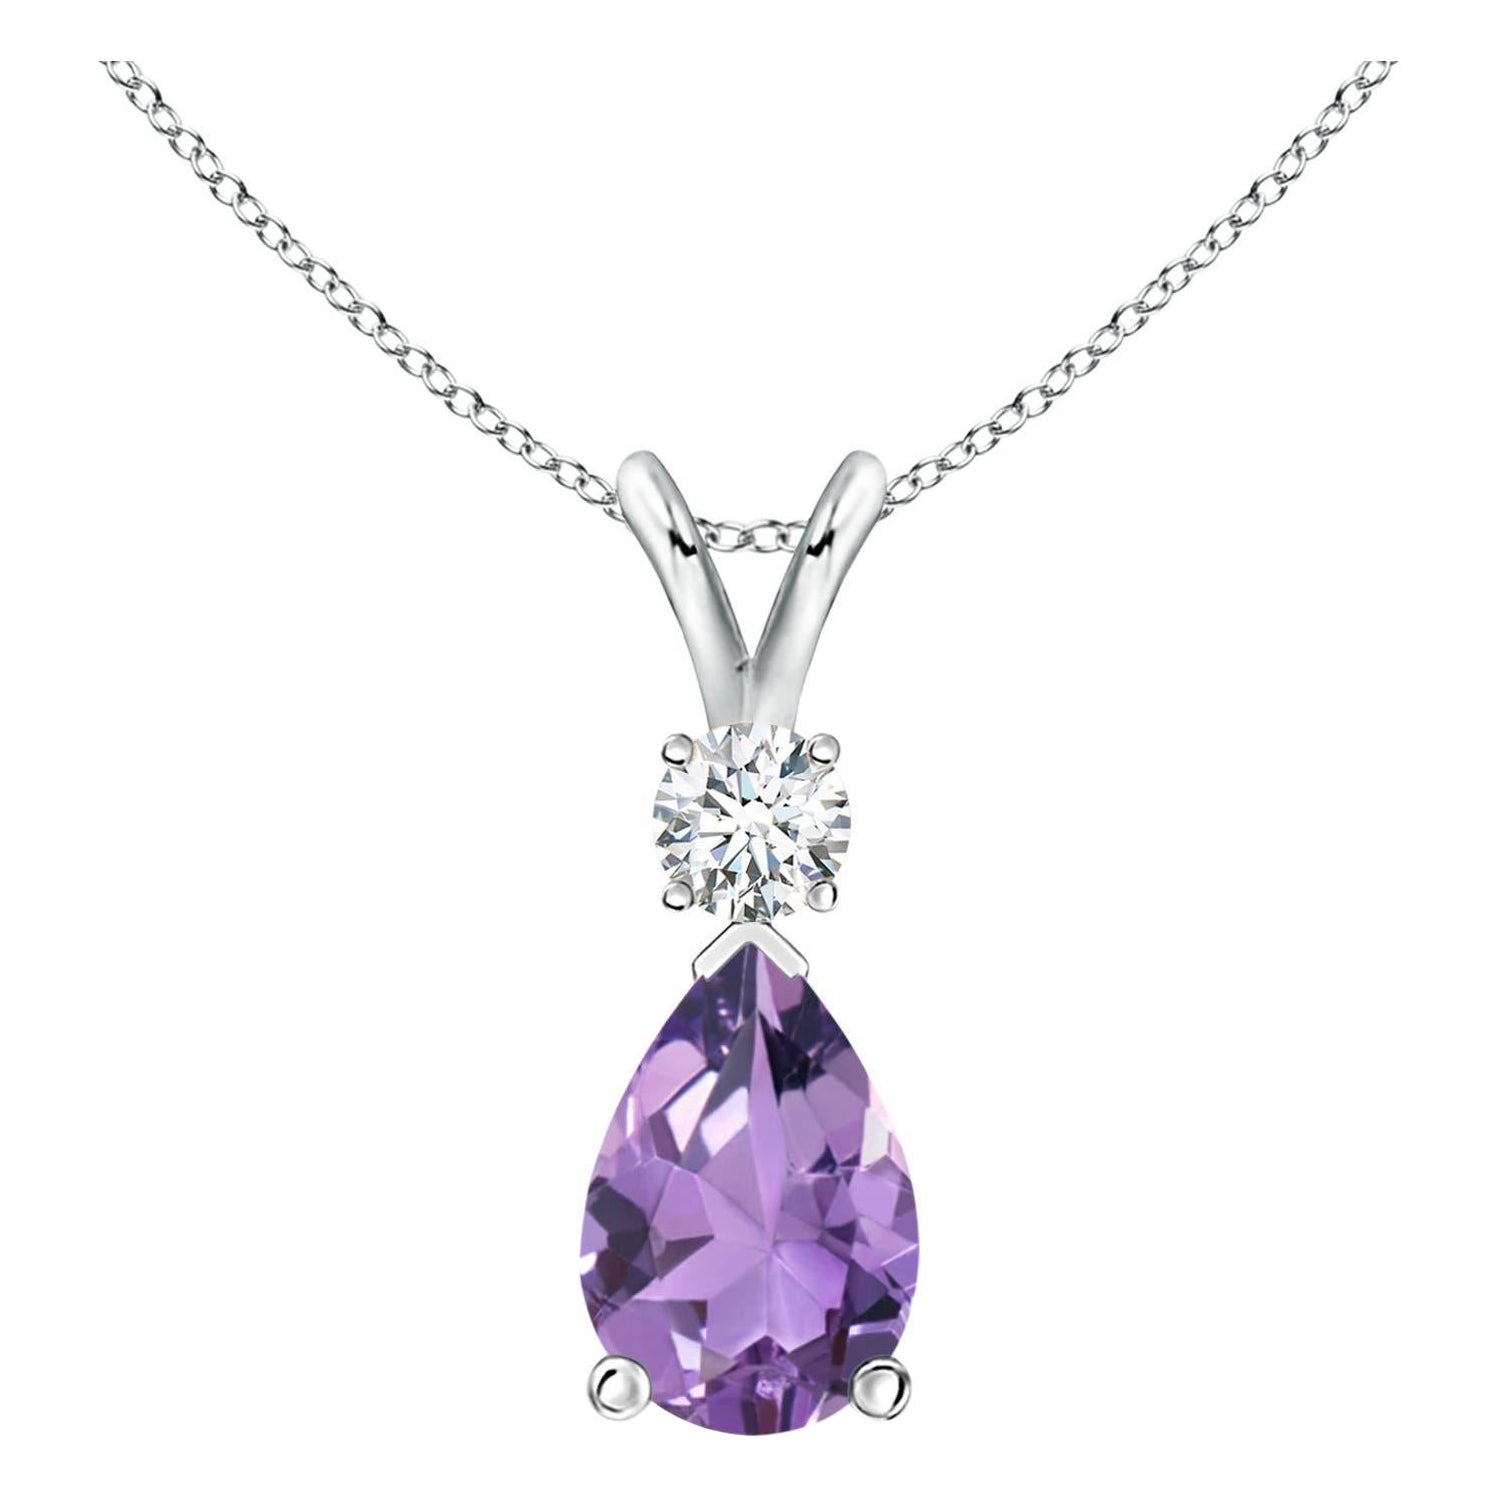 Natural 2.6 ct Amethyst Teardrop Pendant with Diamond in 925 Sterling Silver For Sale